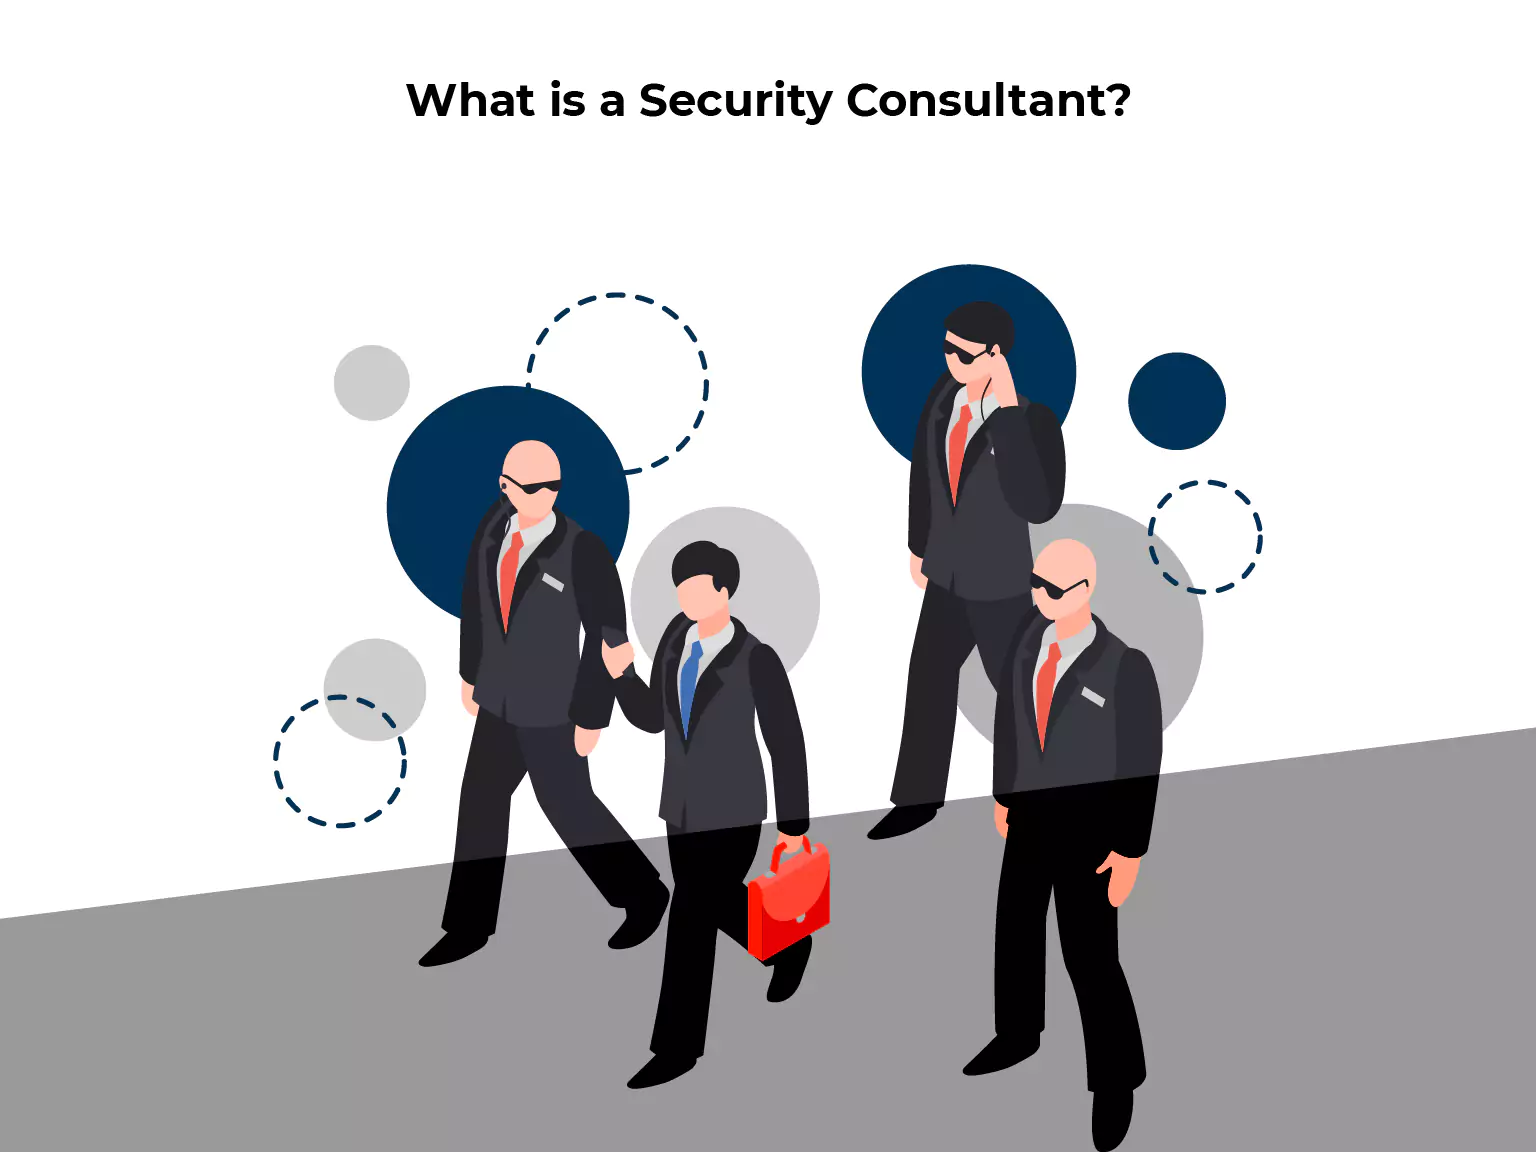 What is a Security Consultant?